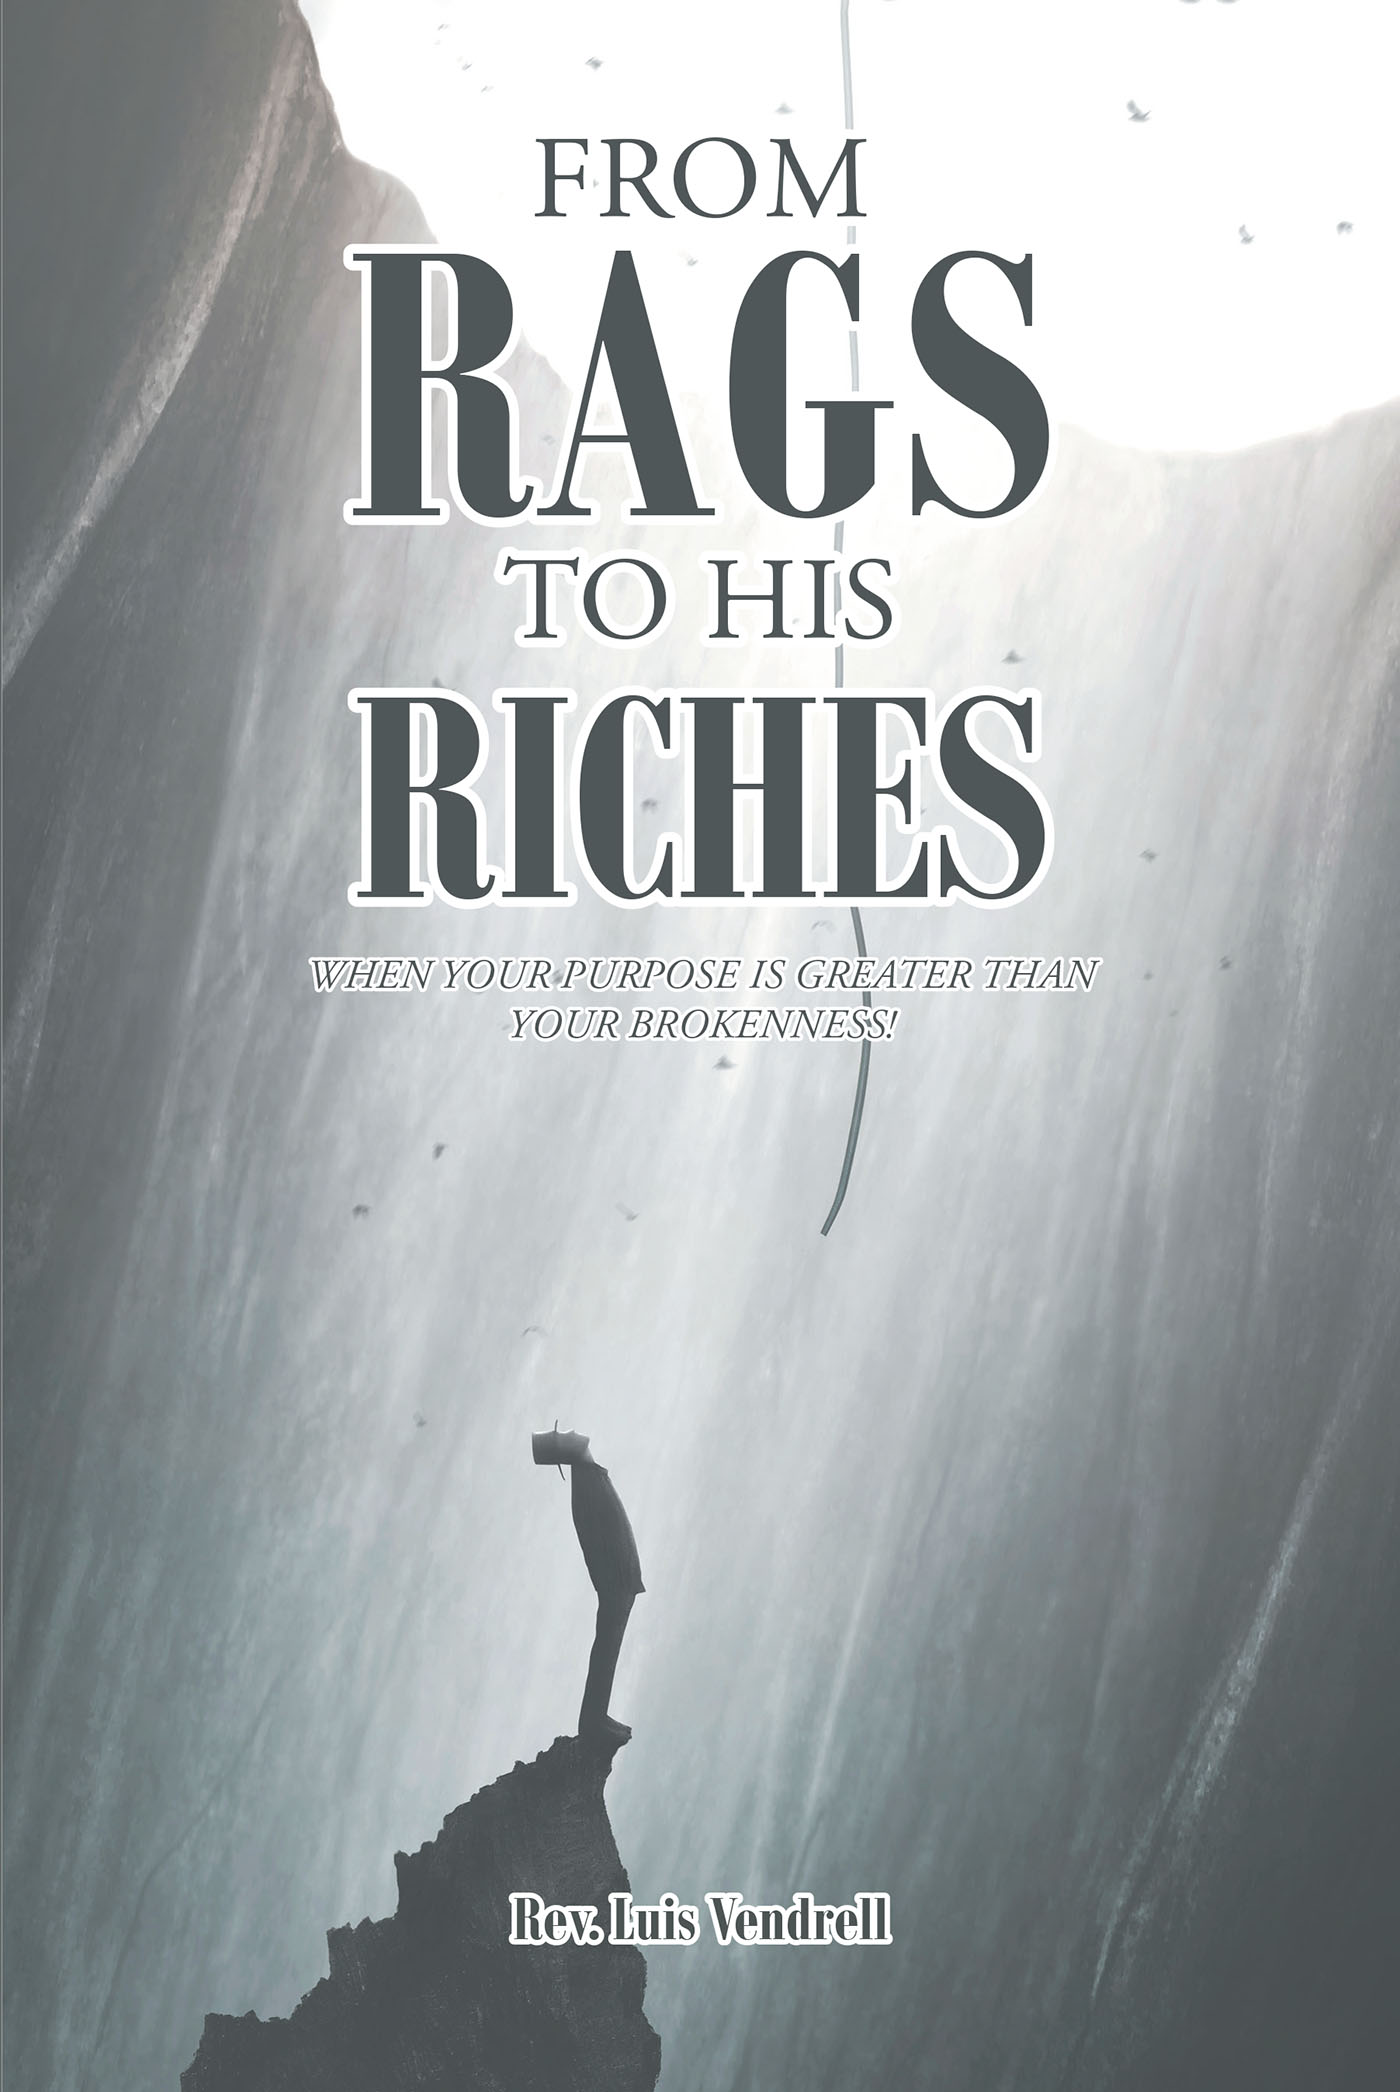 Author Rev. Luis Vendrell’s New Book, "From Rags to His Riches," is a Heartfelt Account of How the Author Turned His Life Around Through Faith, Determination, & the Lord